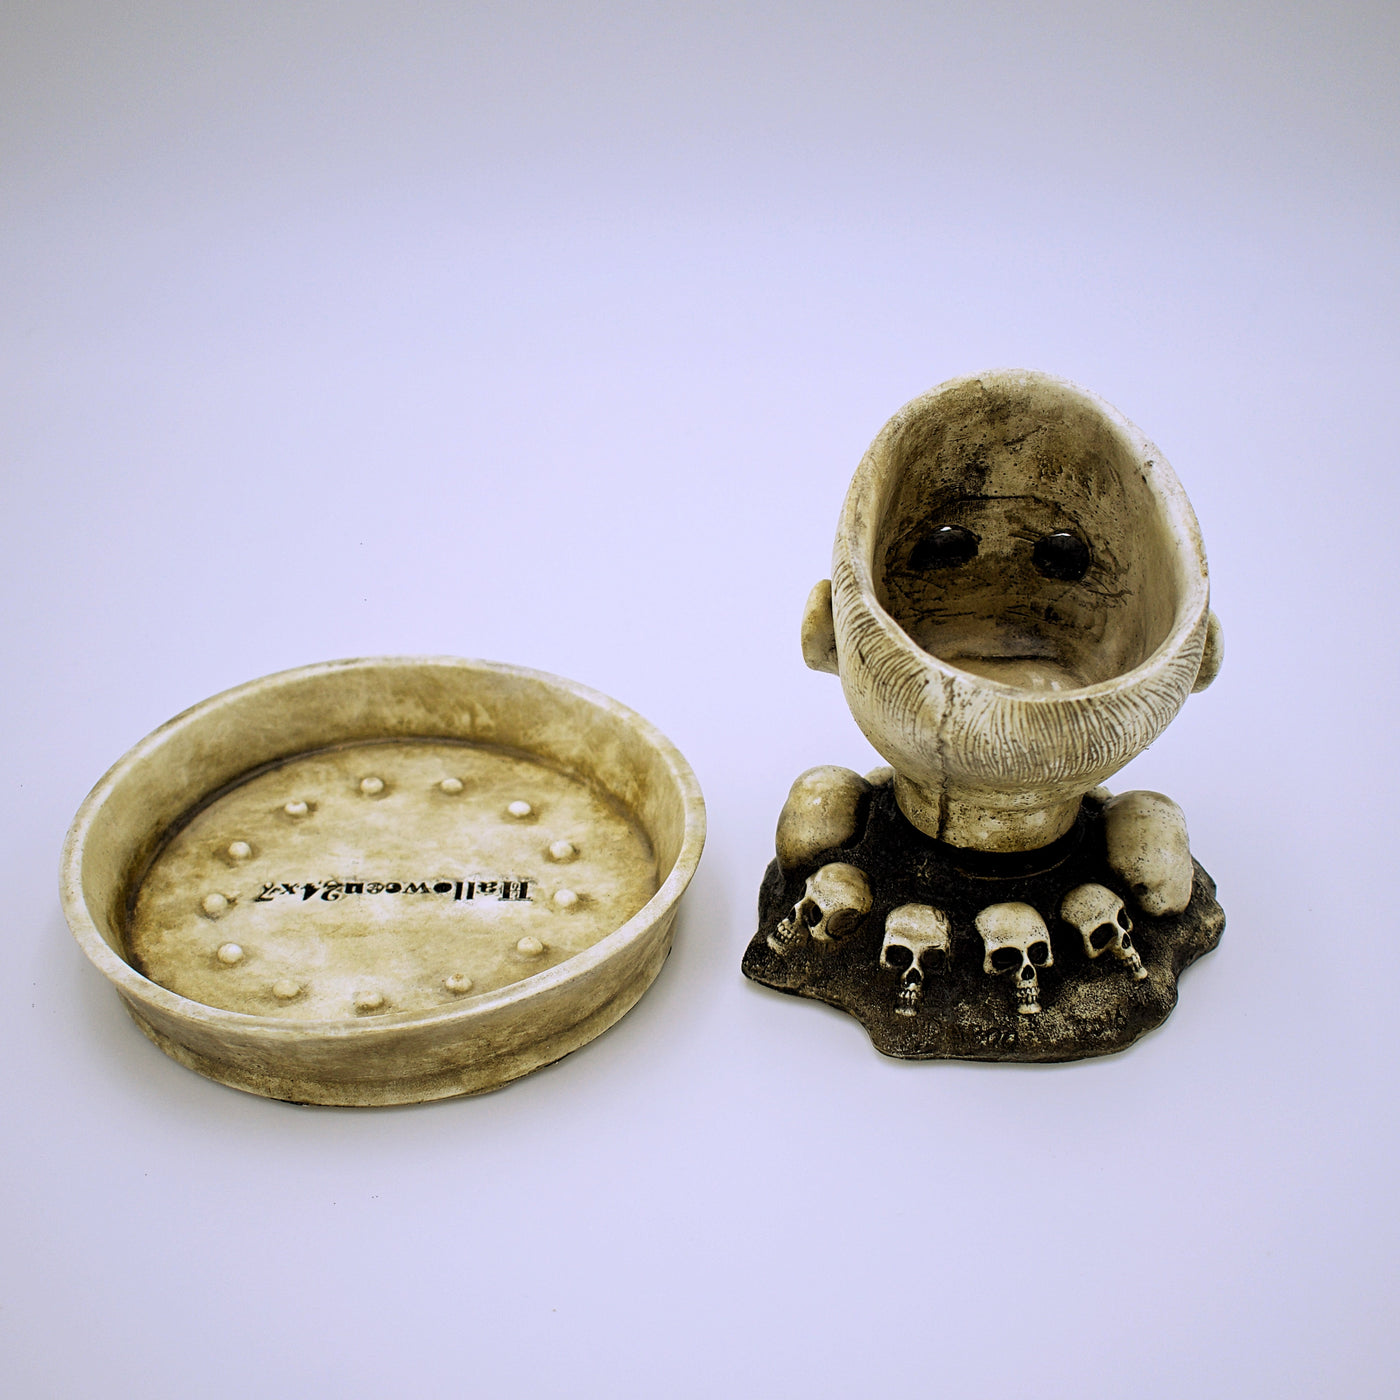 Baby Doll Head With Skulls Planter and Saucer - The Cranio Collections